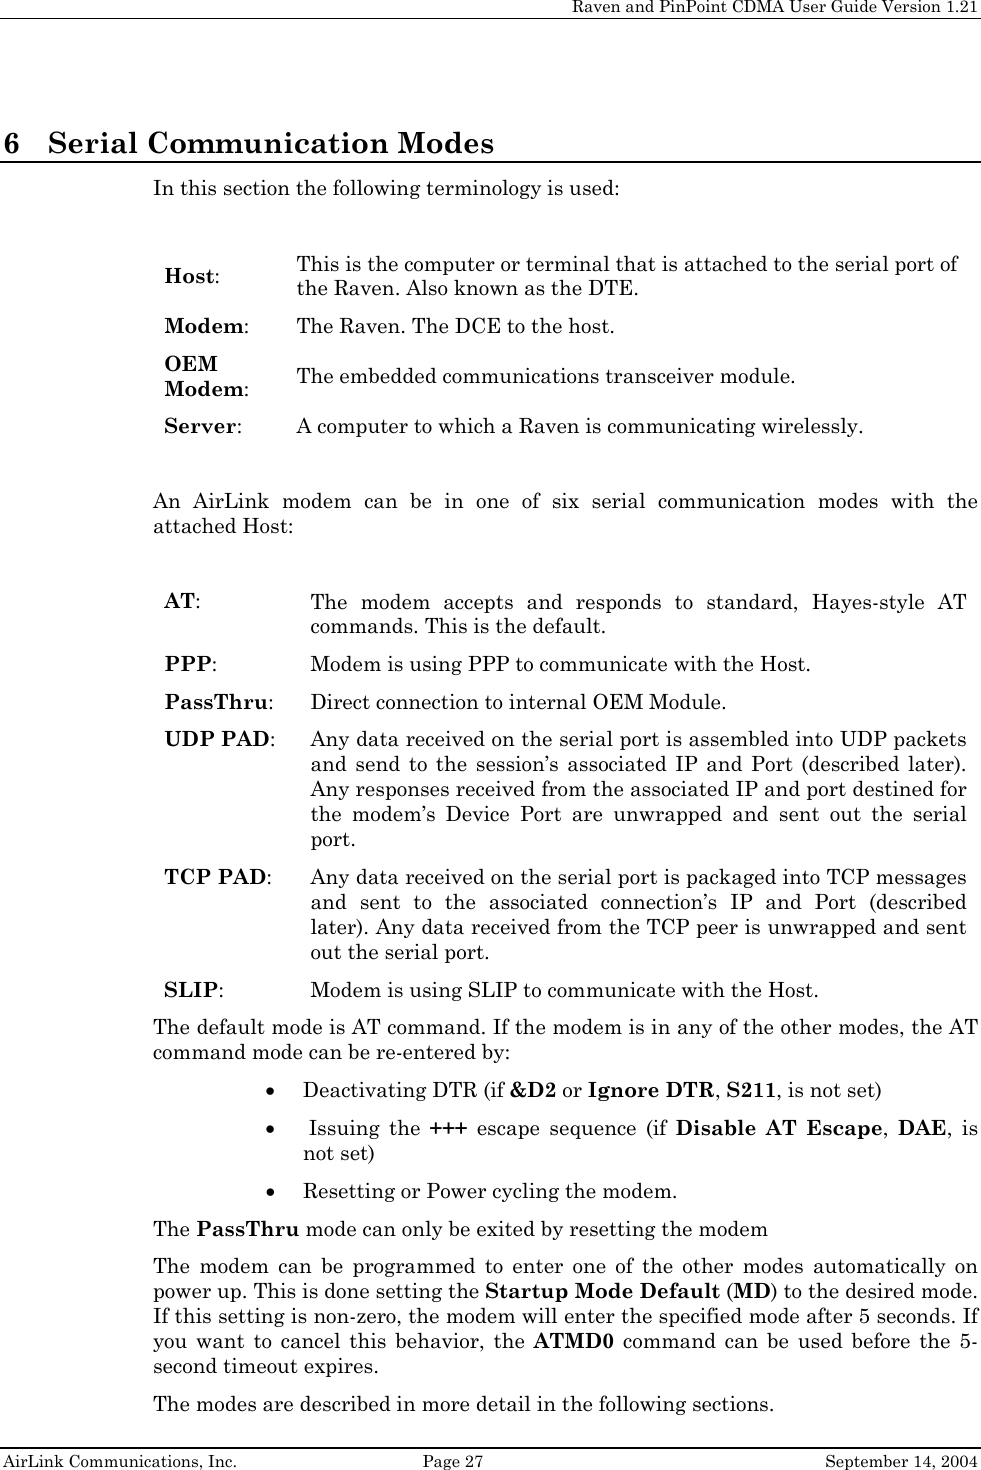     Raven and PinPoint CDMA User Guide Version 1.21  AirLink Communications, Inc.  Page 27  September 14, 2004 6 Serial Communication Modes In this section the following terminology is used:  Host: This is the computer or terminal that is attached to the serial port of the Raven. Also known as the DTE. Modem: The Raven. The DCE to the host. OEM Modem: The embedded communications transceiver module. Server:  A computer to which a Raven is communicating wirelessly.  An AirLink modem can be in one of six serial communication modes with the attached Host:  AT: The modem accepts and responds to standard, Hayes-style AT commands. This is the default.  PPP: Modem is using PPP to communicate with the Host. PassThru: Direct connection to internal OEM Module. UDP PAD: Any data received on the serial port is assembled into UDP packets and send to the session’s associated IP and Port (described later). Any responses received from the associated IP and port destined for the modem’s Device Port are unwrapped and sent out the serial port. TCP PAD: Any data received on the serial port is packaged into TCP messages and sent to the associated connection’s IP and Port (described later). Any data received from the TCP peer is unwrapped and sent out the serial port. SLIP: Modem is using SLIP to communicate with the Host. The default mode is AT command. If the modem is in any of the other modes, the AT command mode can be re-entered by: • Deactivating DTR (if &amp;D2 or Ignore DTR, S211, is not set) •  Issuing  the  +++ escape sequence (if Disable AT Escape,  DAE, is not set) • Resetting or Power cycling the modem. The PassThru mode can only be exited by resetting the modem The modem can be programmed to enter one of the other modes automatically on power up. This is done setting the Startup Mode Default (MD) to the desired mode. If this setting is non-zero, the modem will enter the specified mode after 5 seconds. If you want to cancel this behavior, the ATMD0 command can be used before the 5-second timeout expires. The modes are described in more detail in the following sections. 